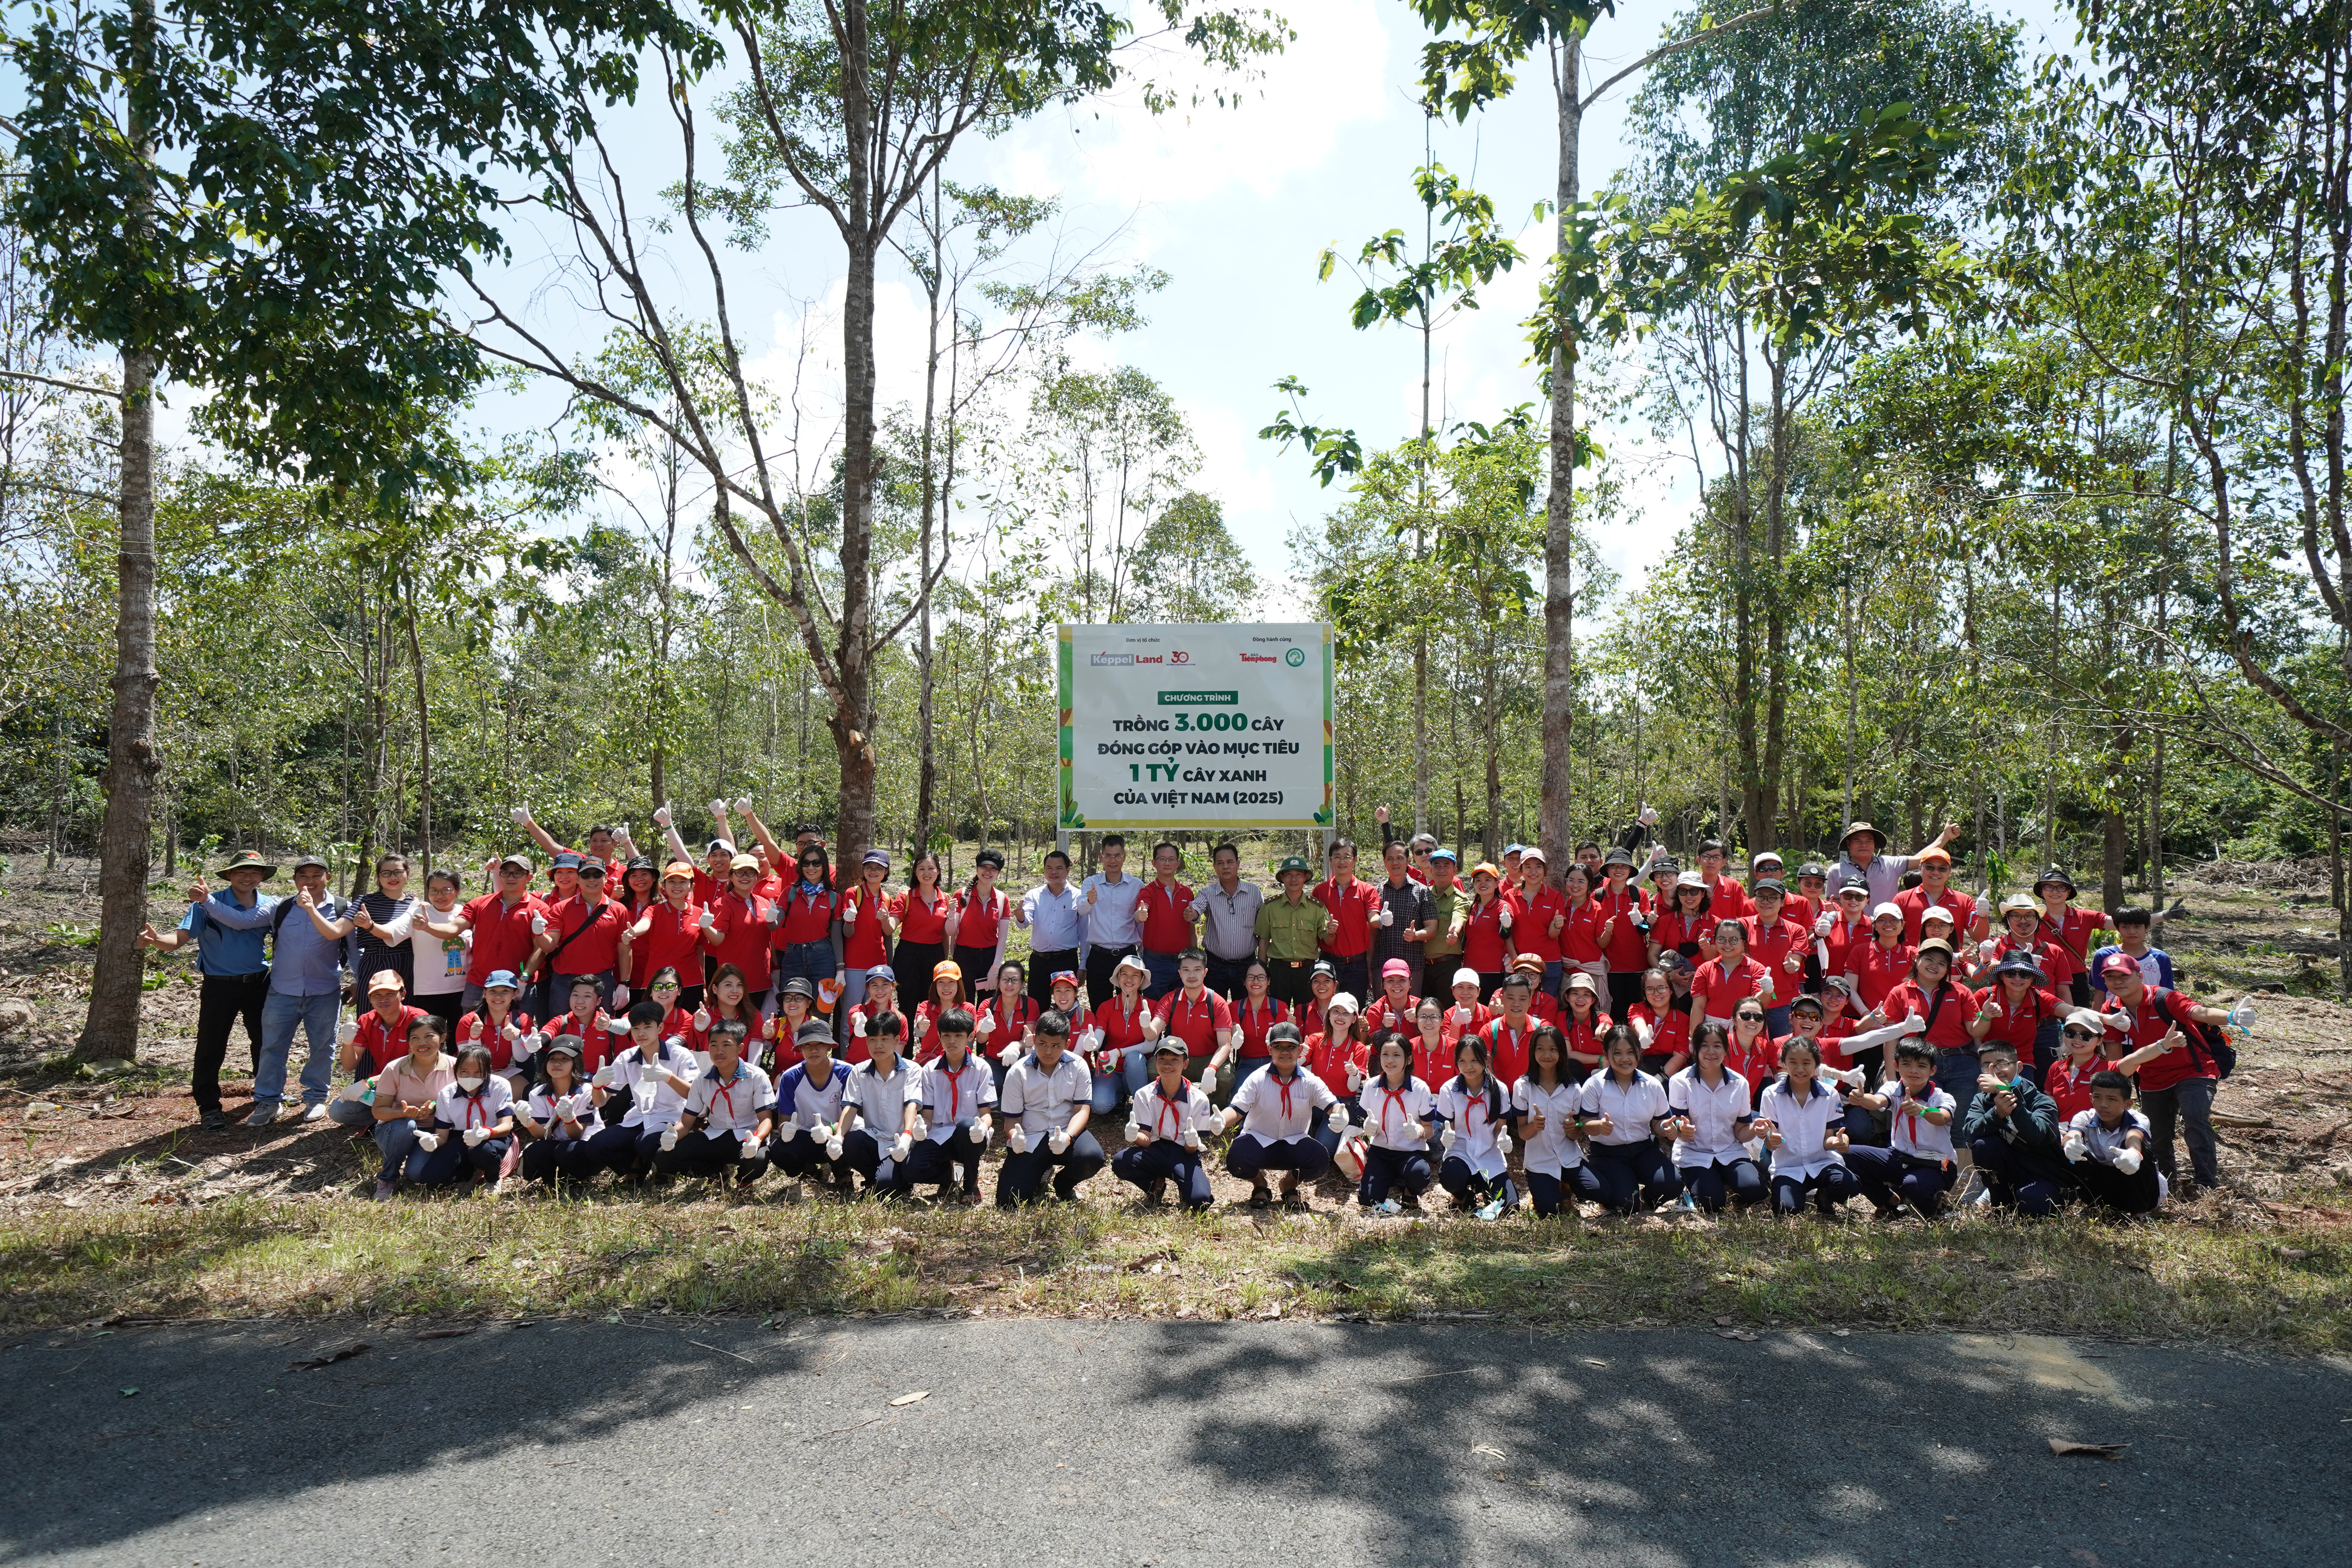 The tree planting event on 28 July 2022 at Dong Nai Culture and Nature Reserve saw the participation of around 100 Keppel Volunteers and students from Ma Da Secondary School in Dong Nai province.